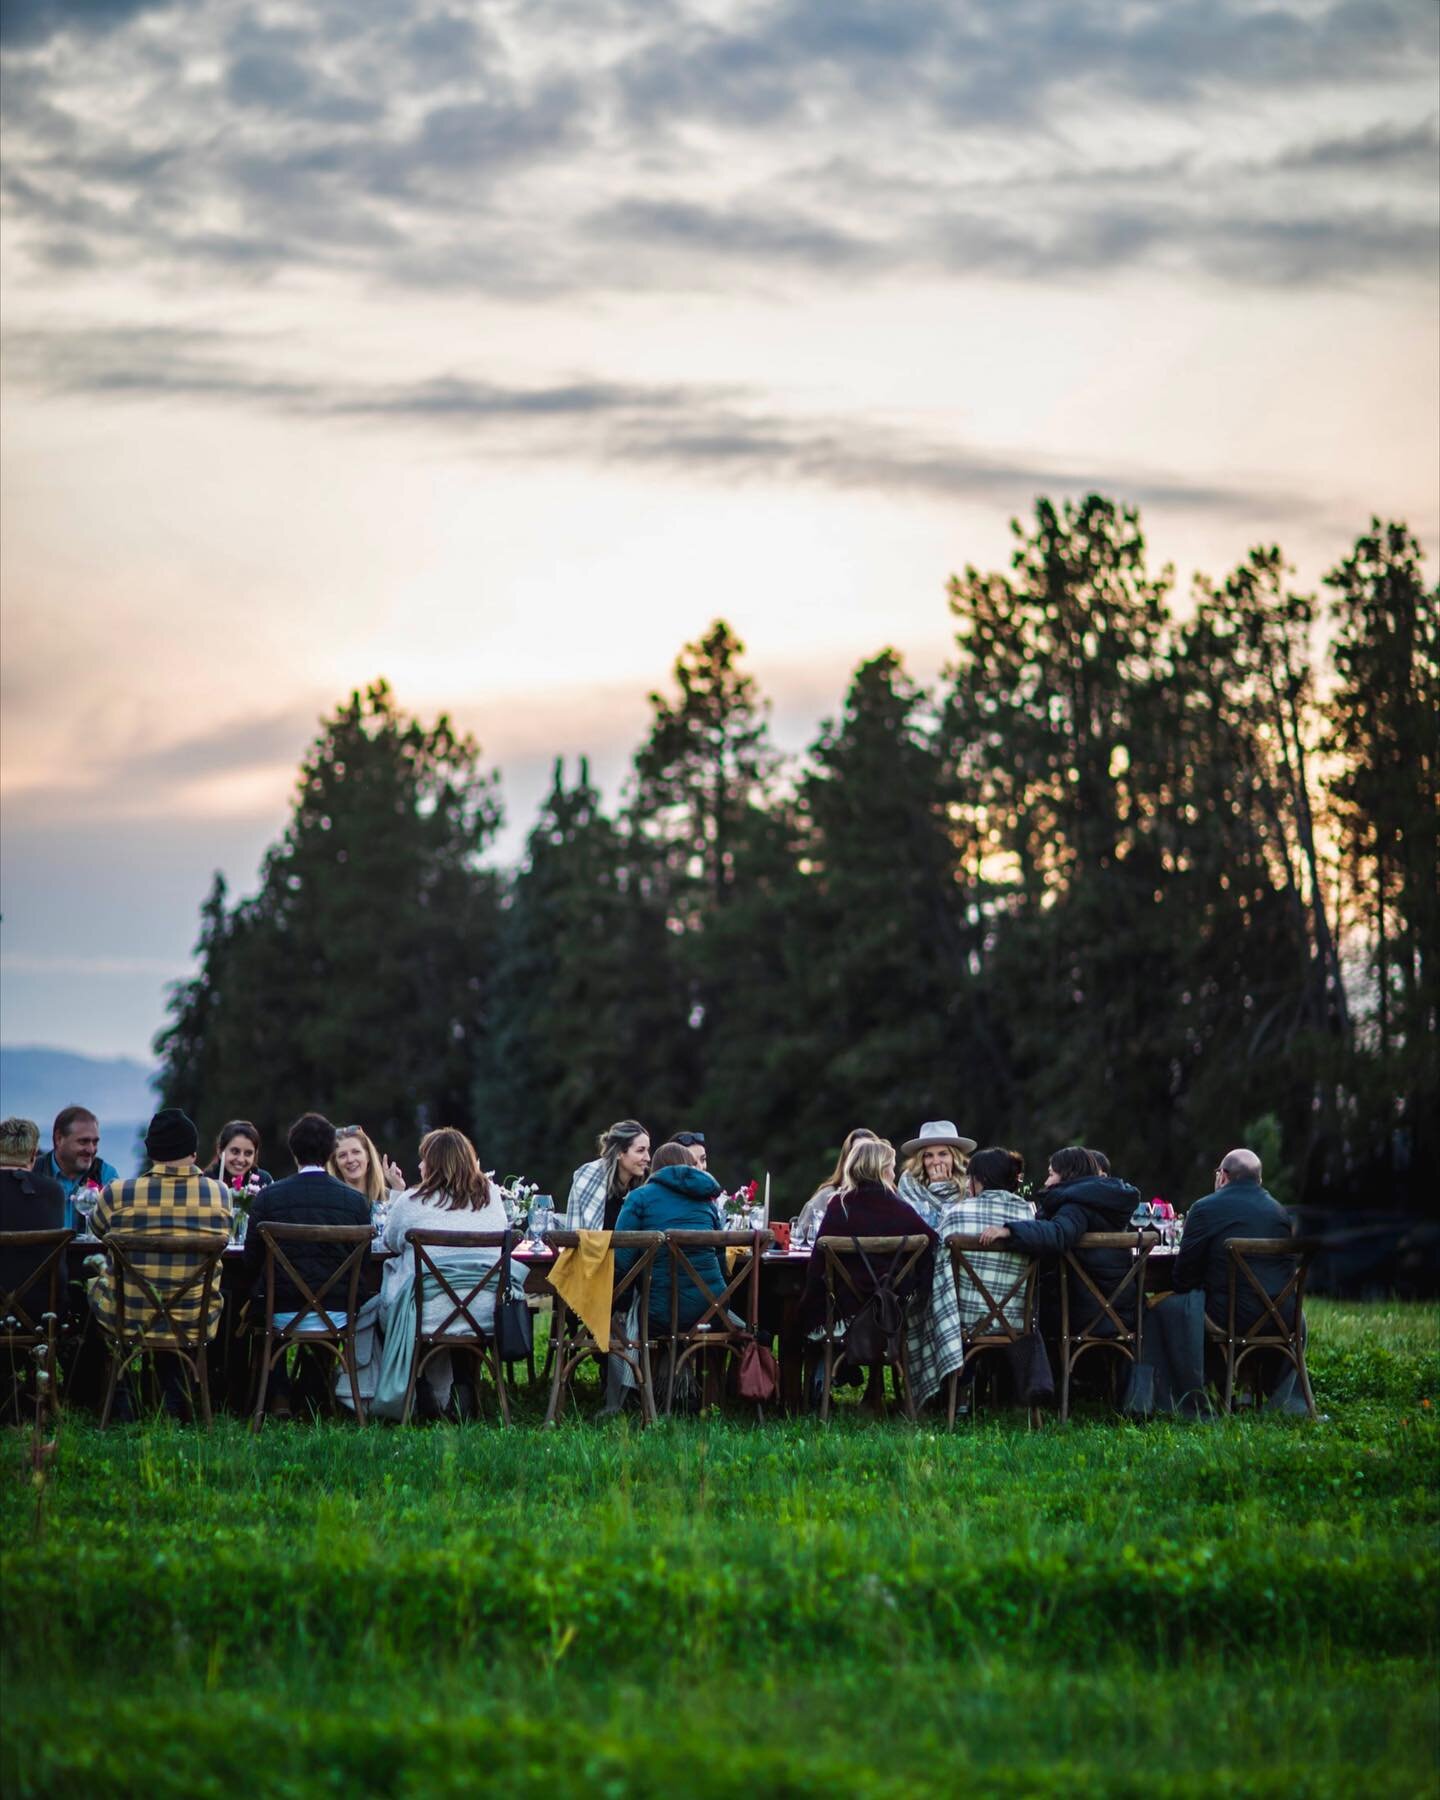 ✨OPEN SEATS✨ Tickets for our sold out Sturgeon Moon Dinner have opened up and we invite you to join us in Oregon wine country under the light of August&rsquo;s full moon 🌕 The table will be sumptuously set, the @westwardwhiskey cocktails will deligh